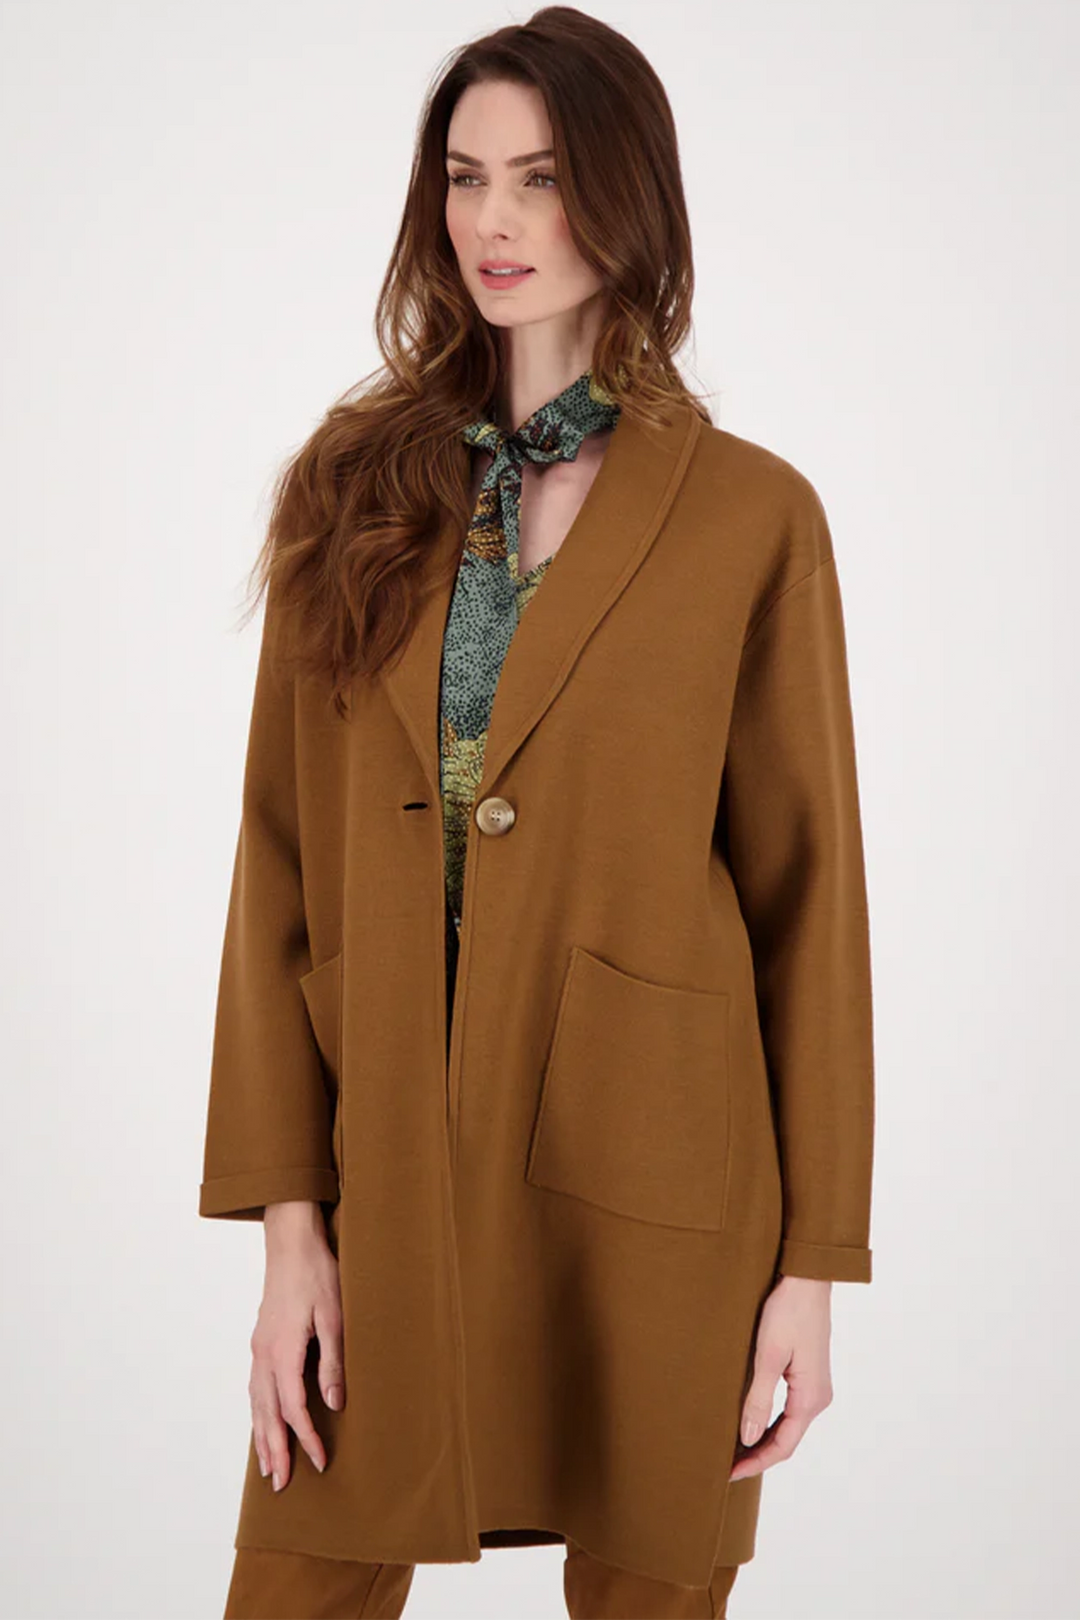 This snug coat has a relaxed fit that adds a formal twist to any casual look.